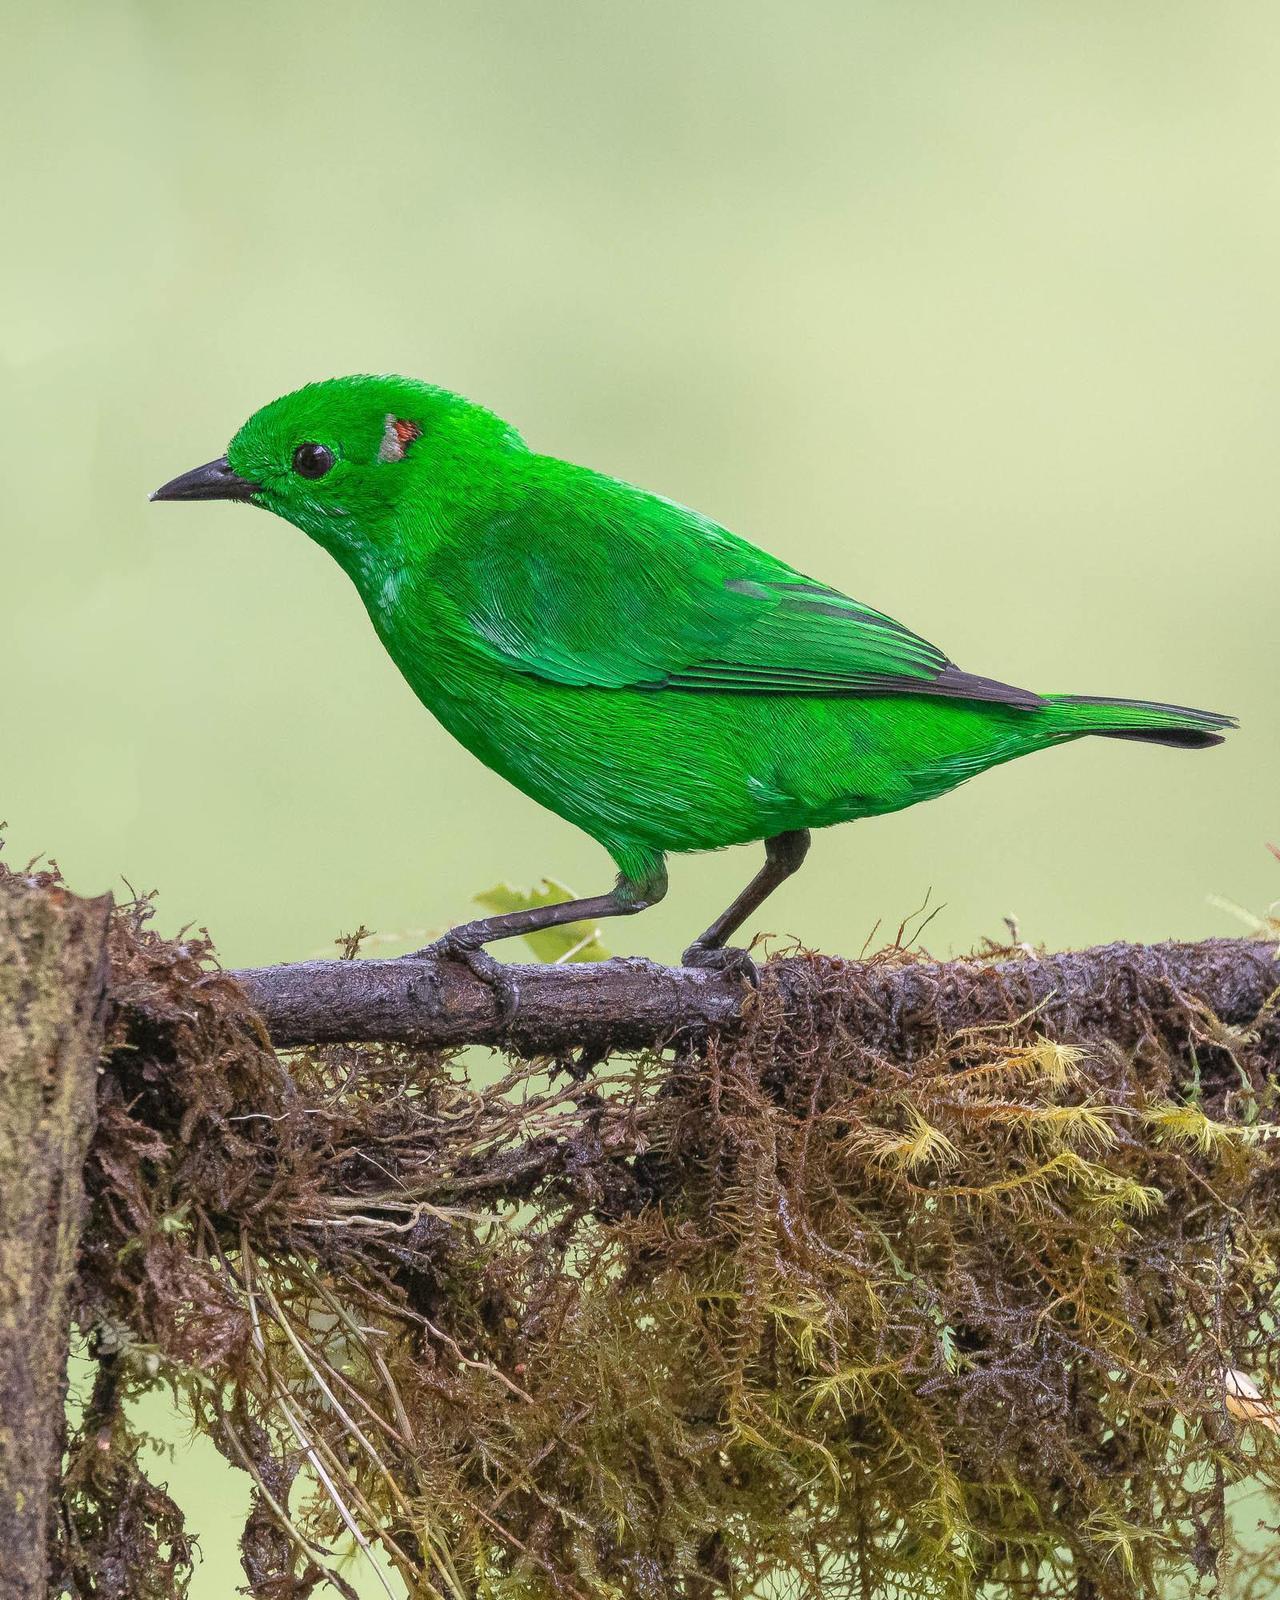 Glistening-green Tanager Photo by Denis Rivard